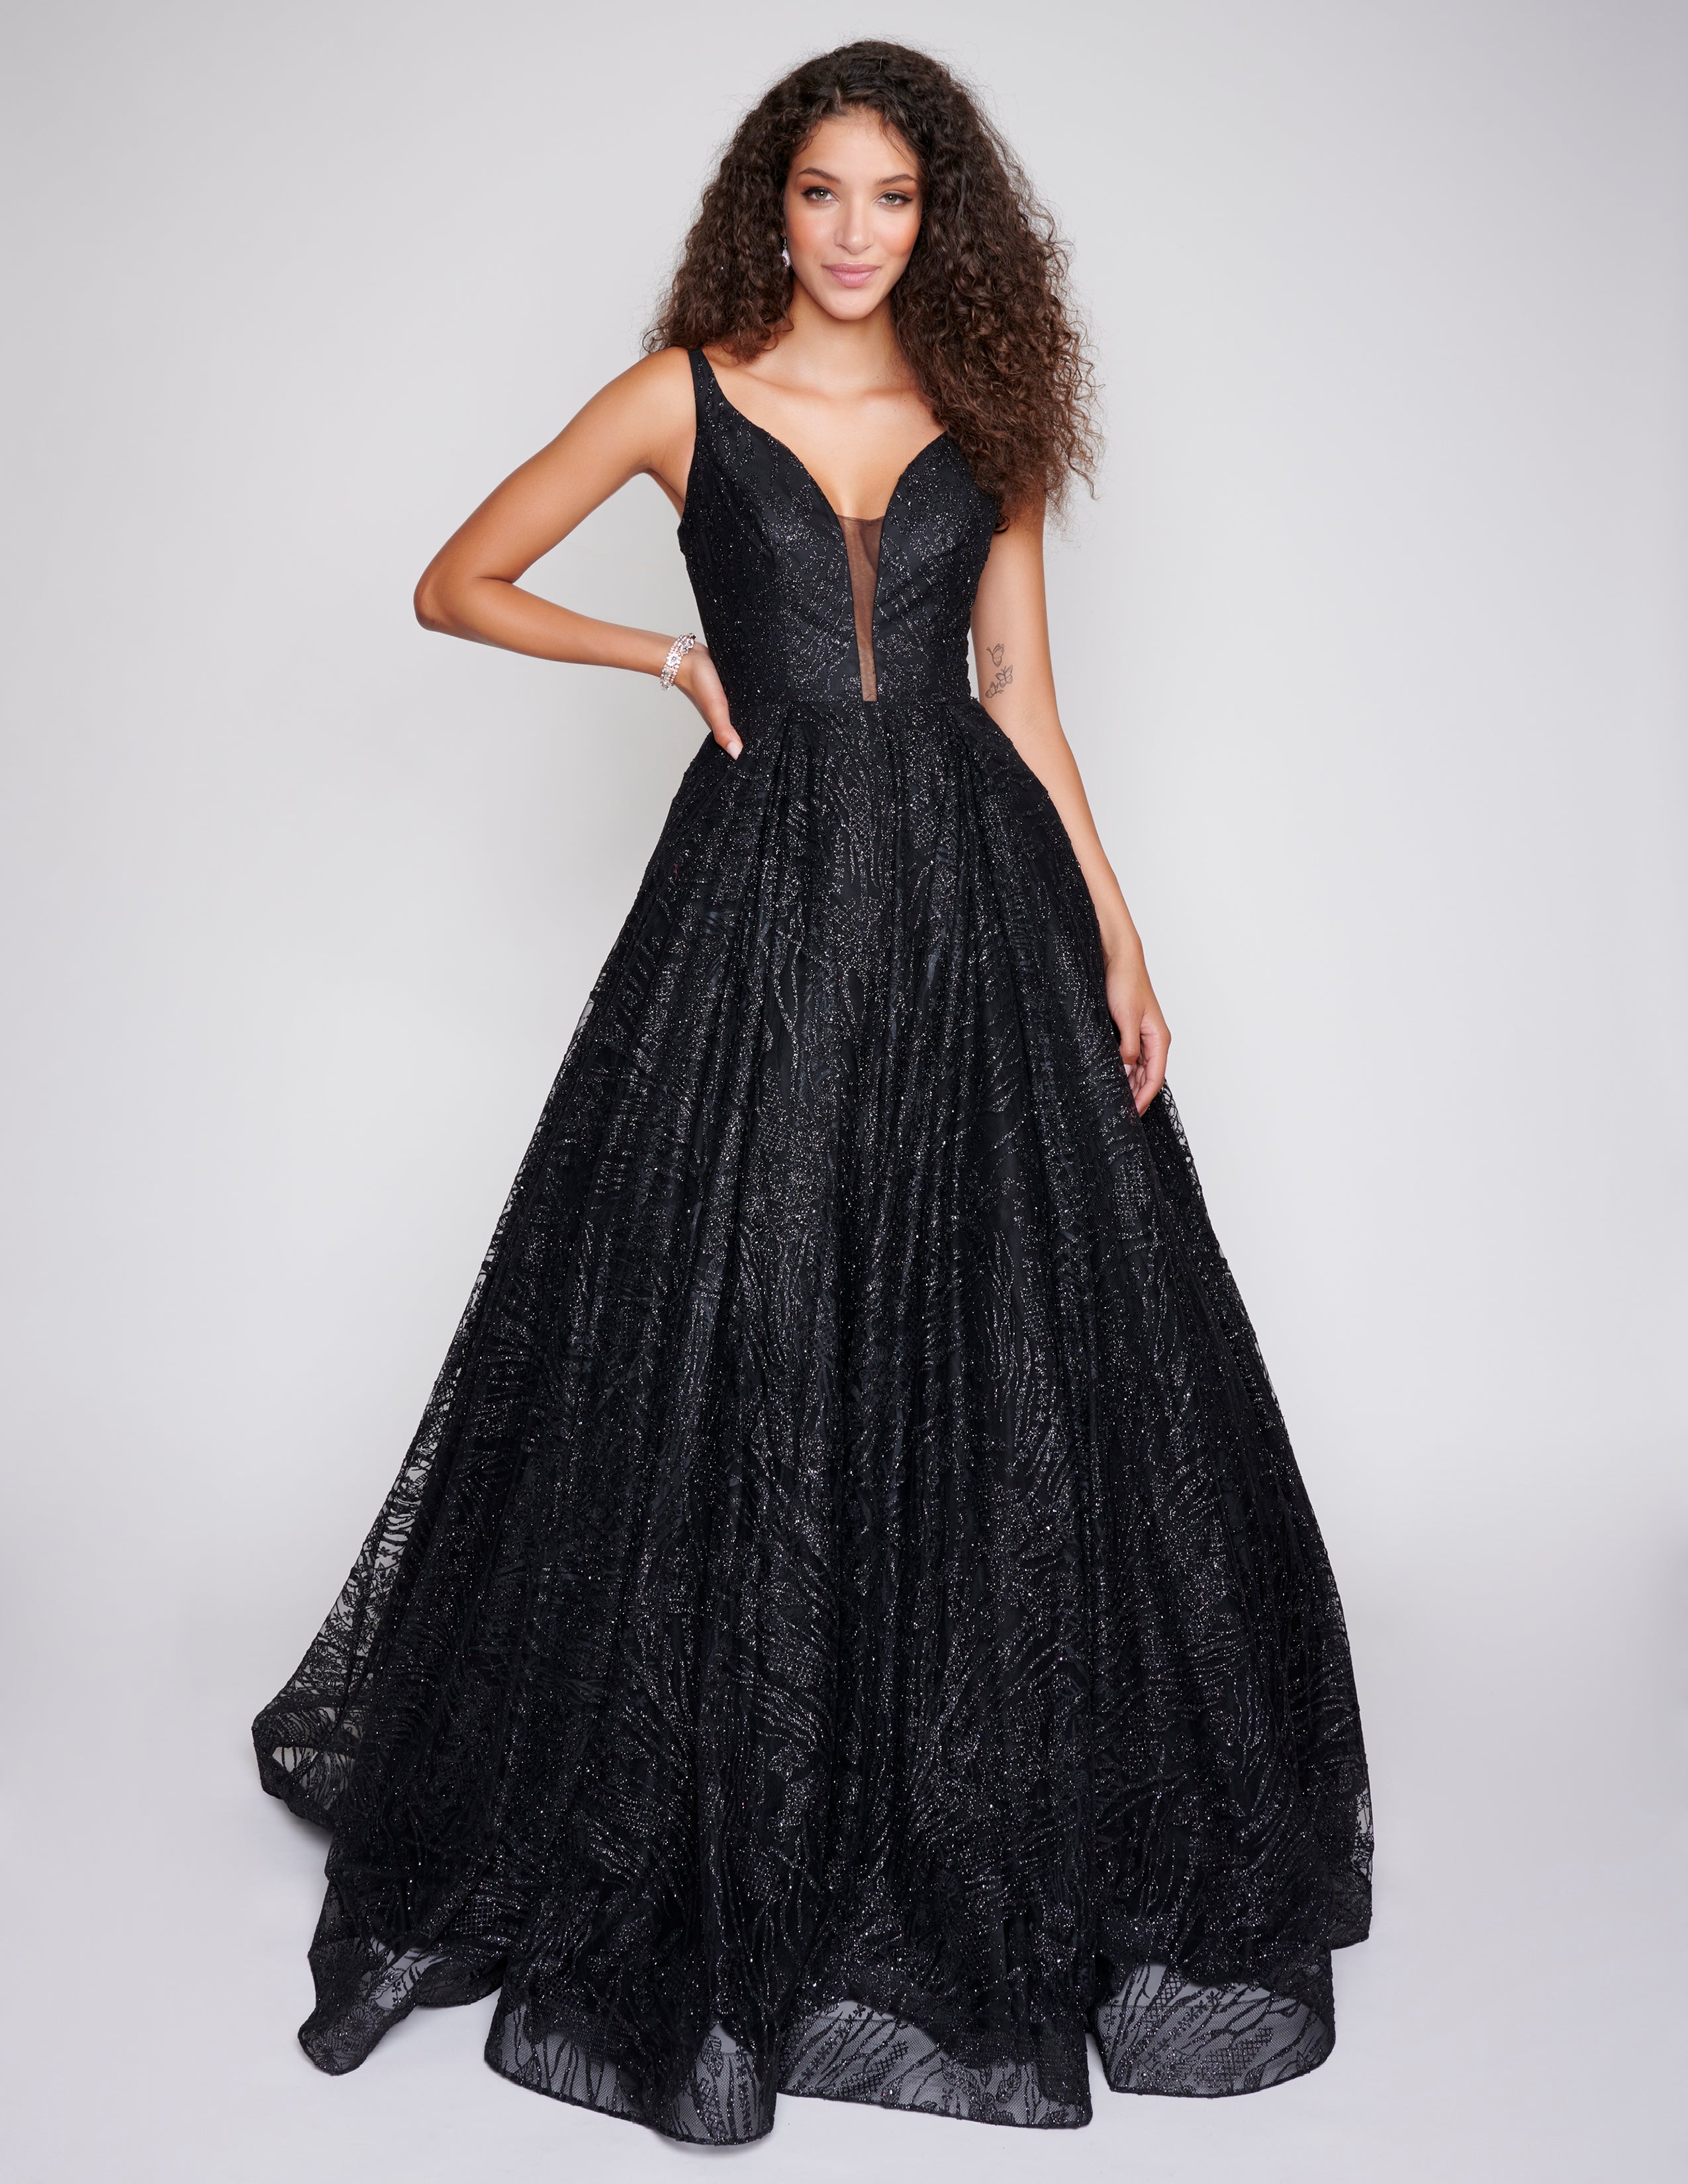 Fanciest Vintage Puffy Sleeve Prom Dresses Ball Gown India | Ubuy